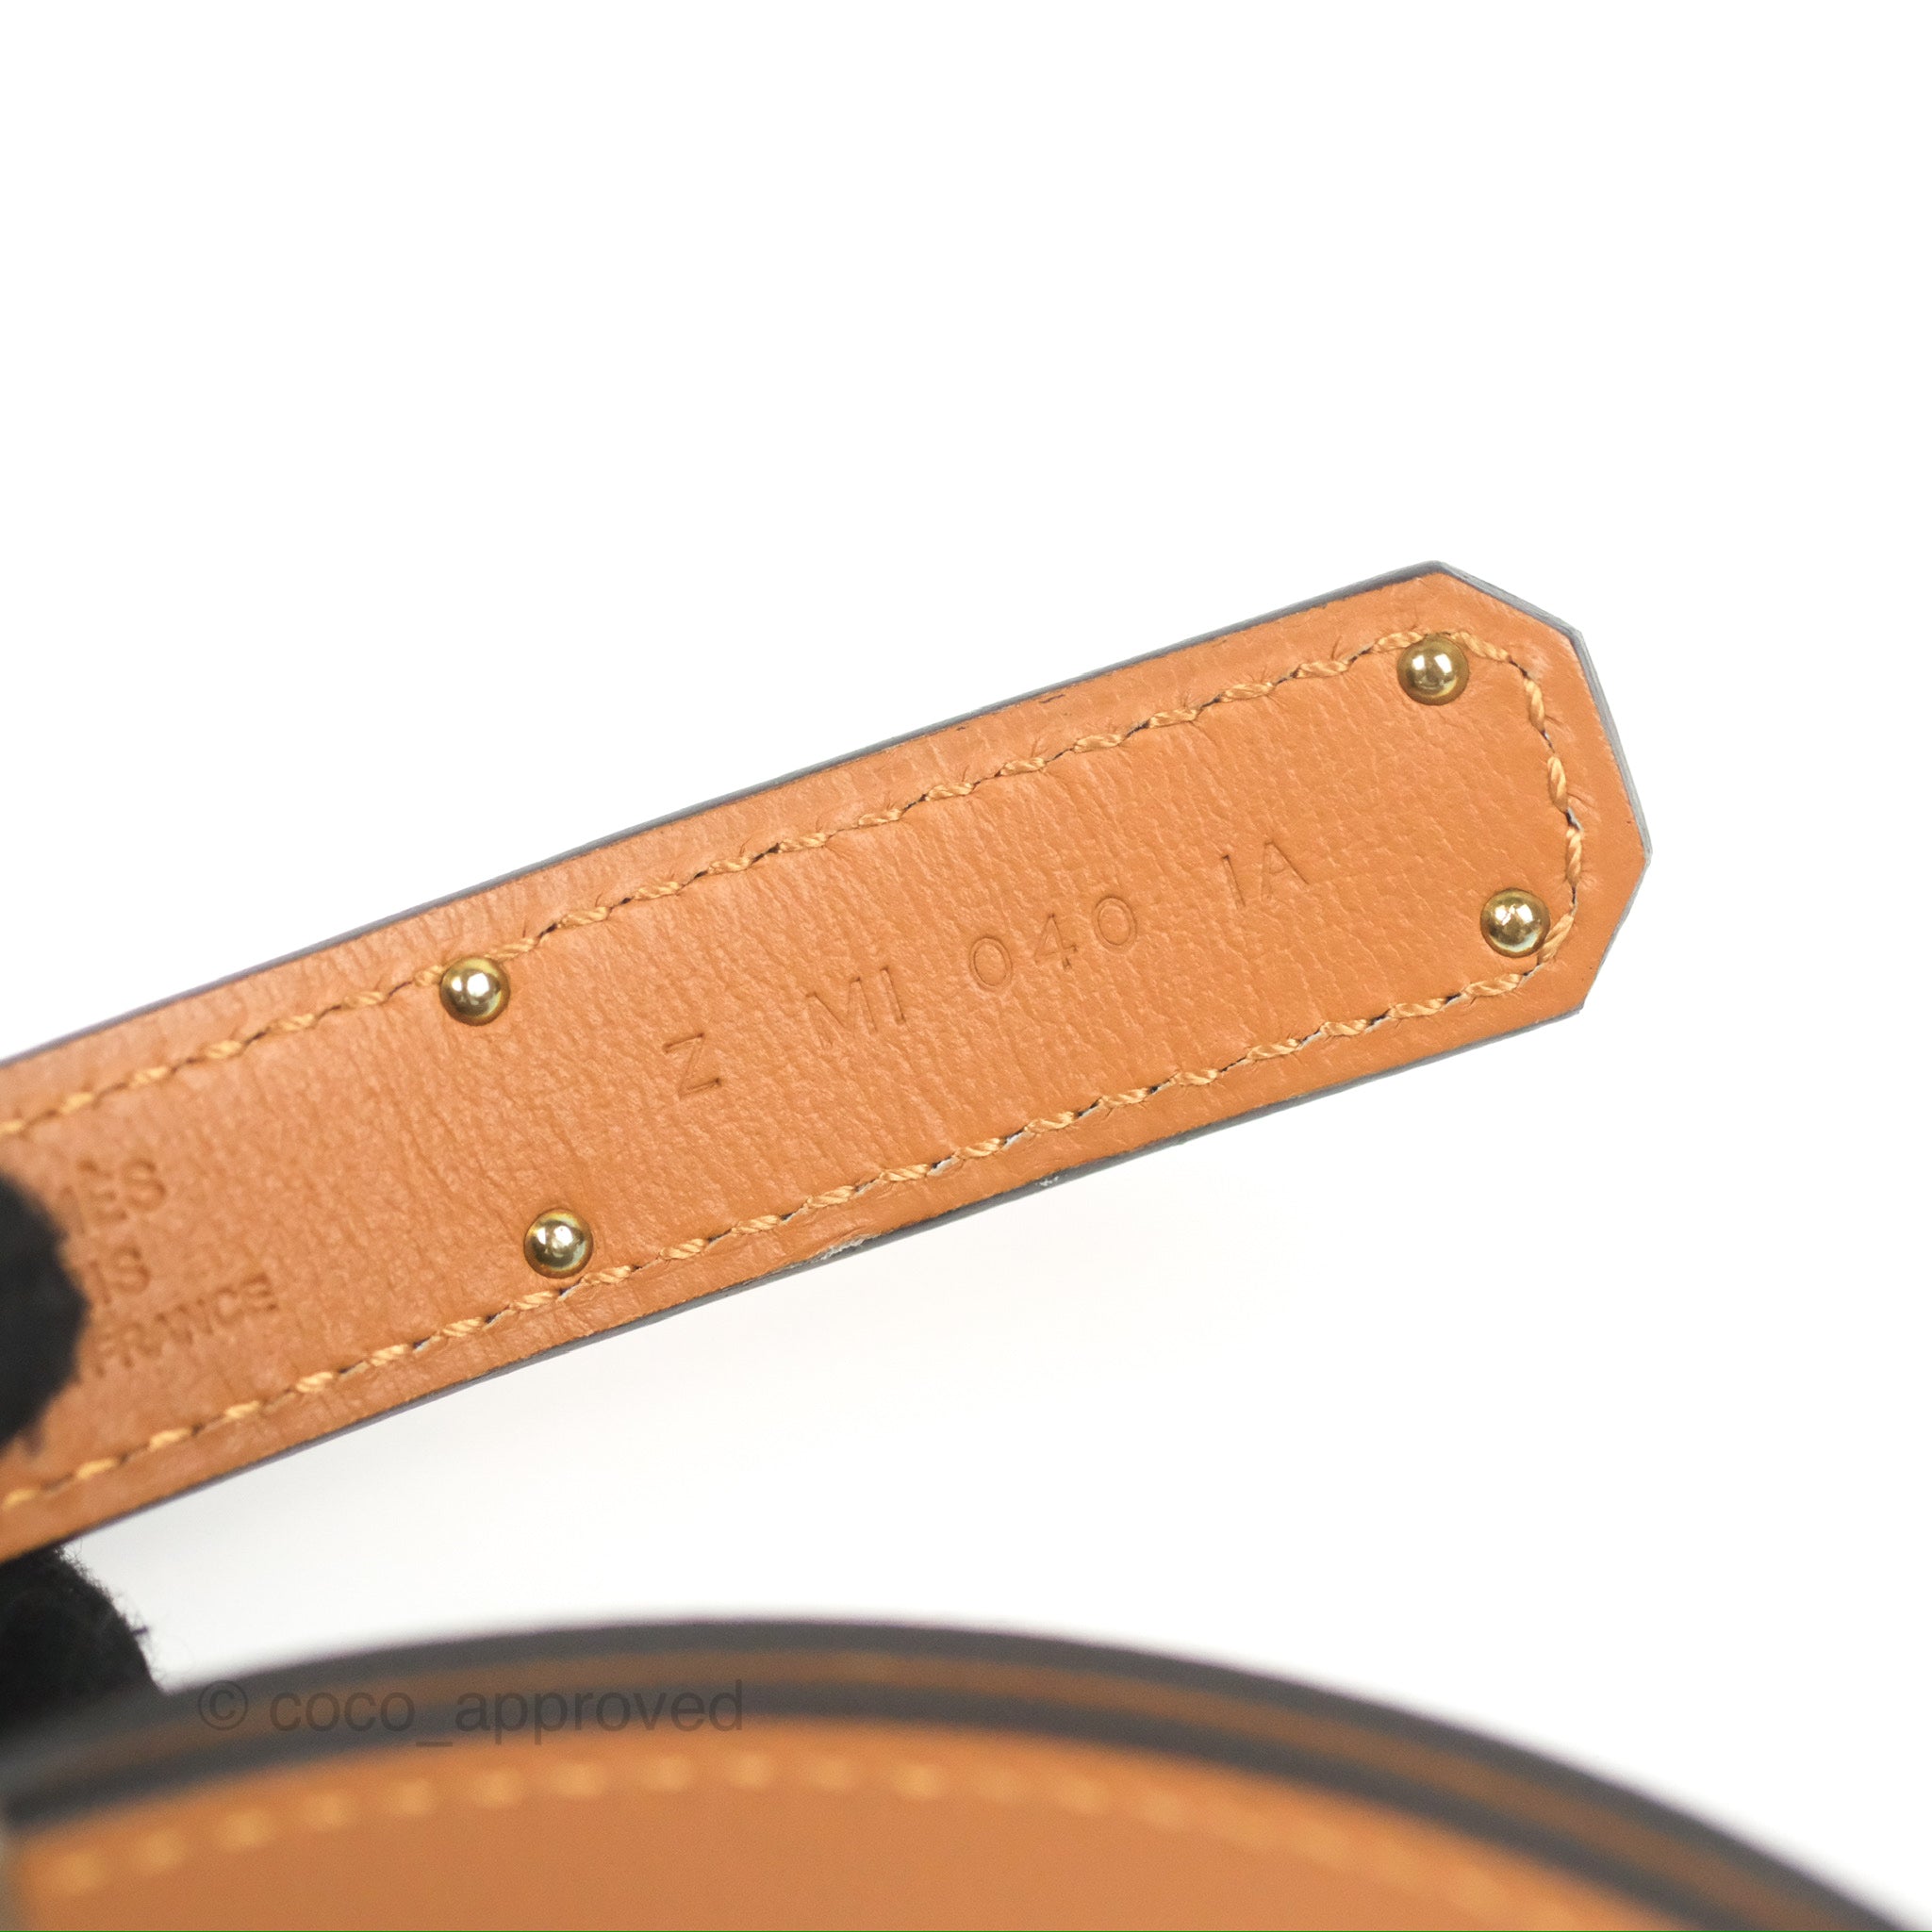 NEW Hermes Kelly Belt In Rose Gold and Etoupe at 1stDibs